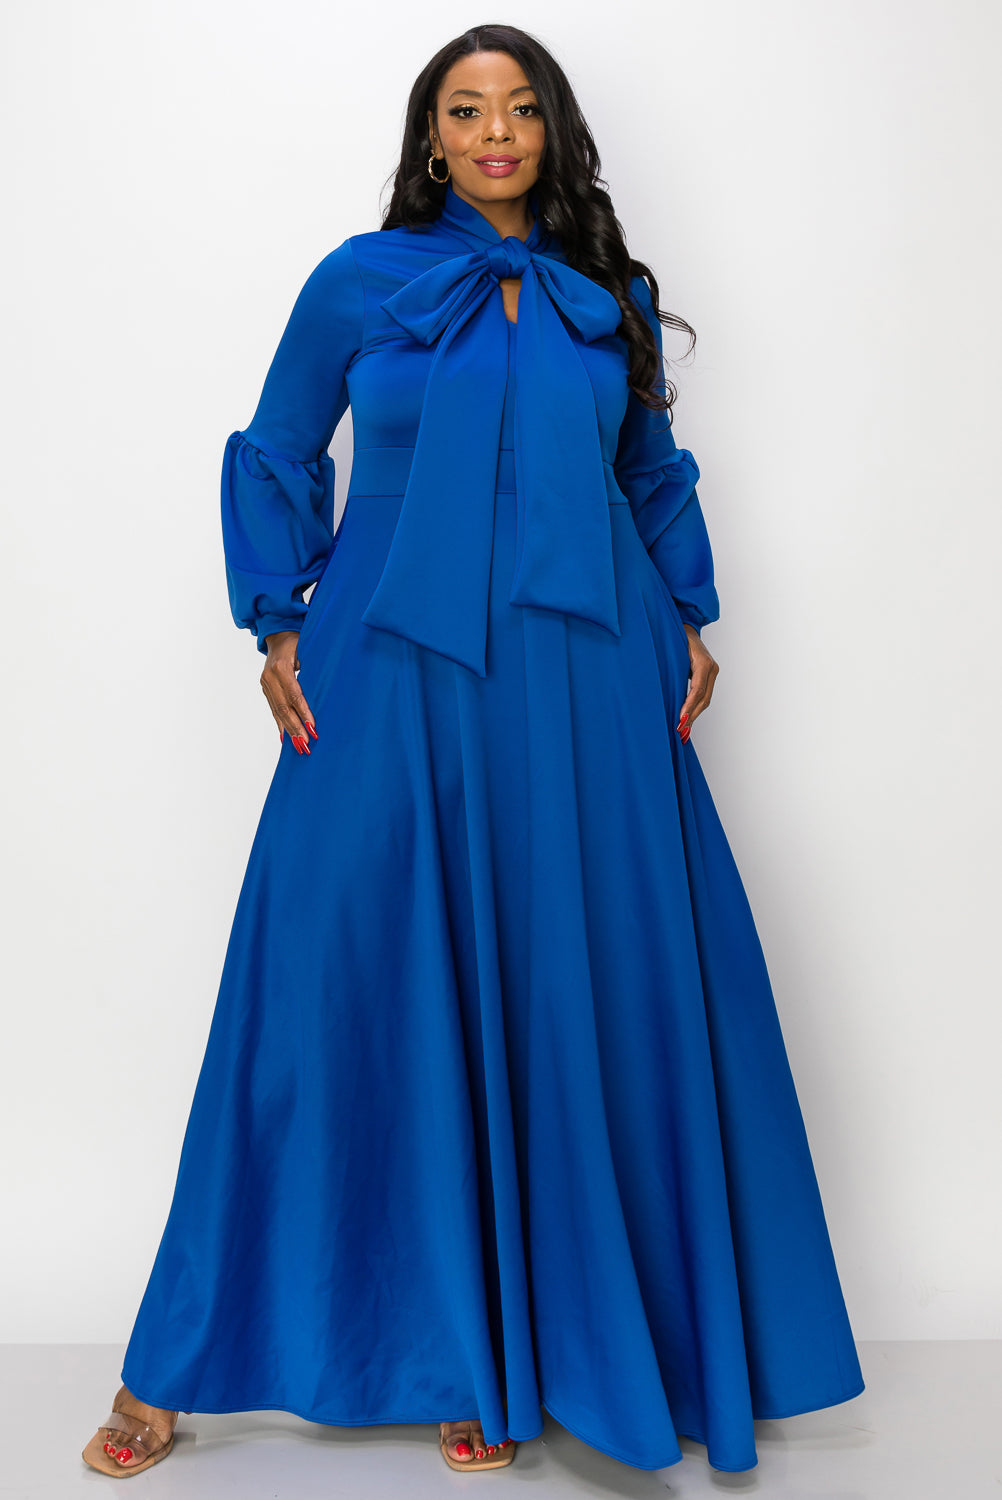 Bella Donna Dress with Ribbon and Bishop Sleeves